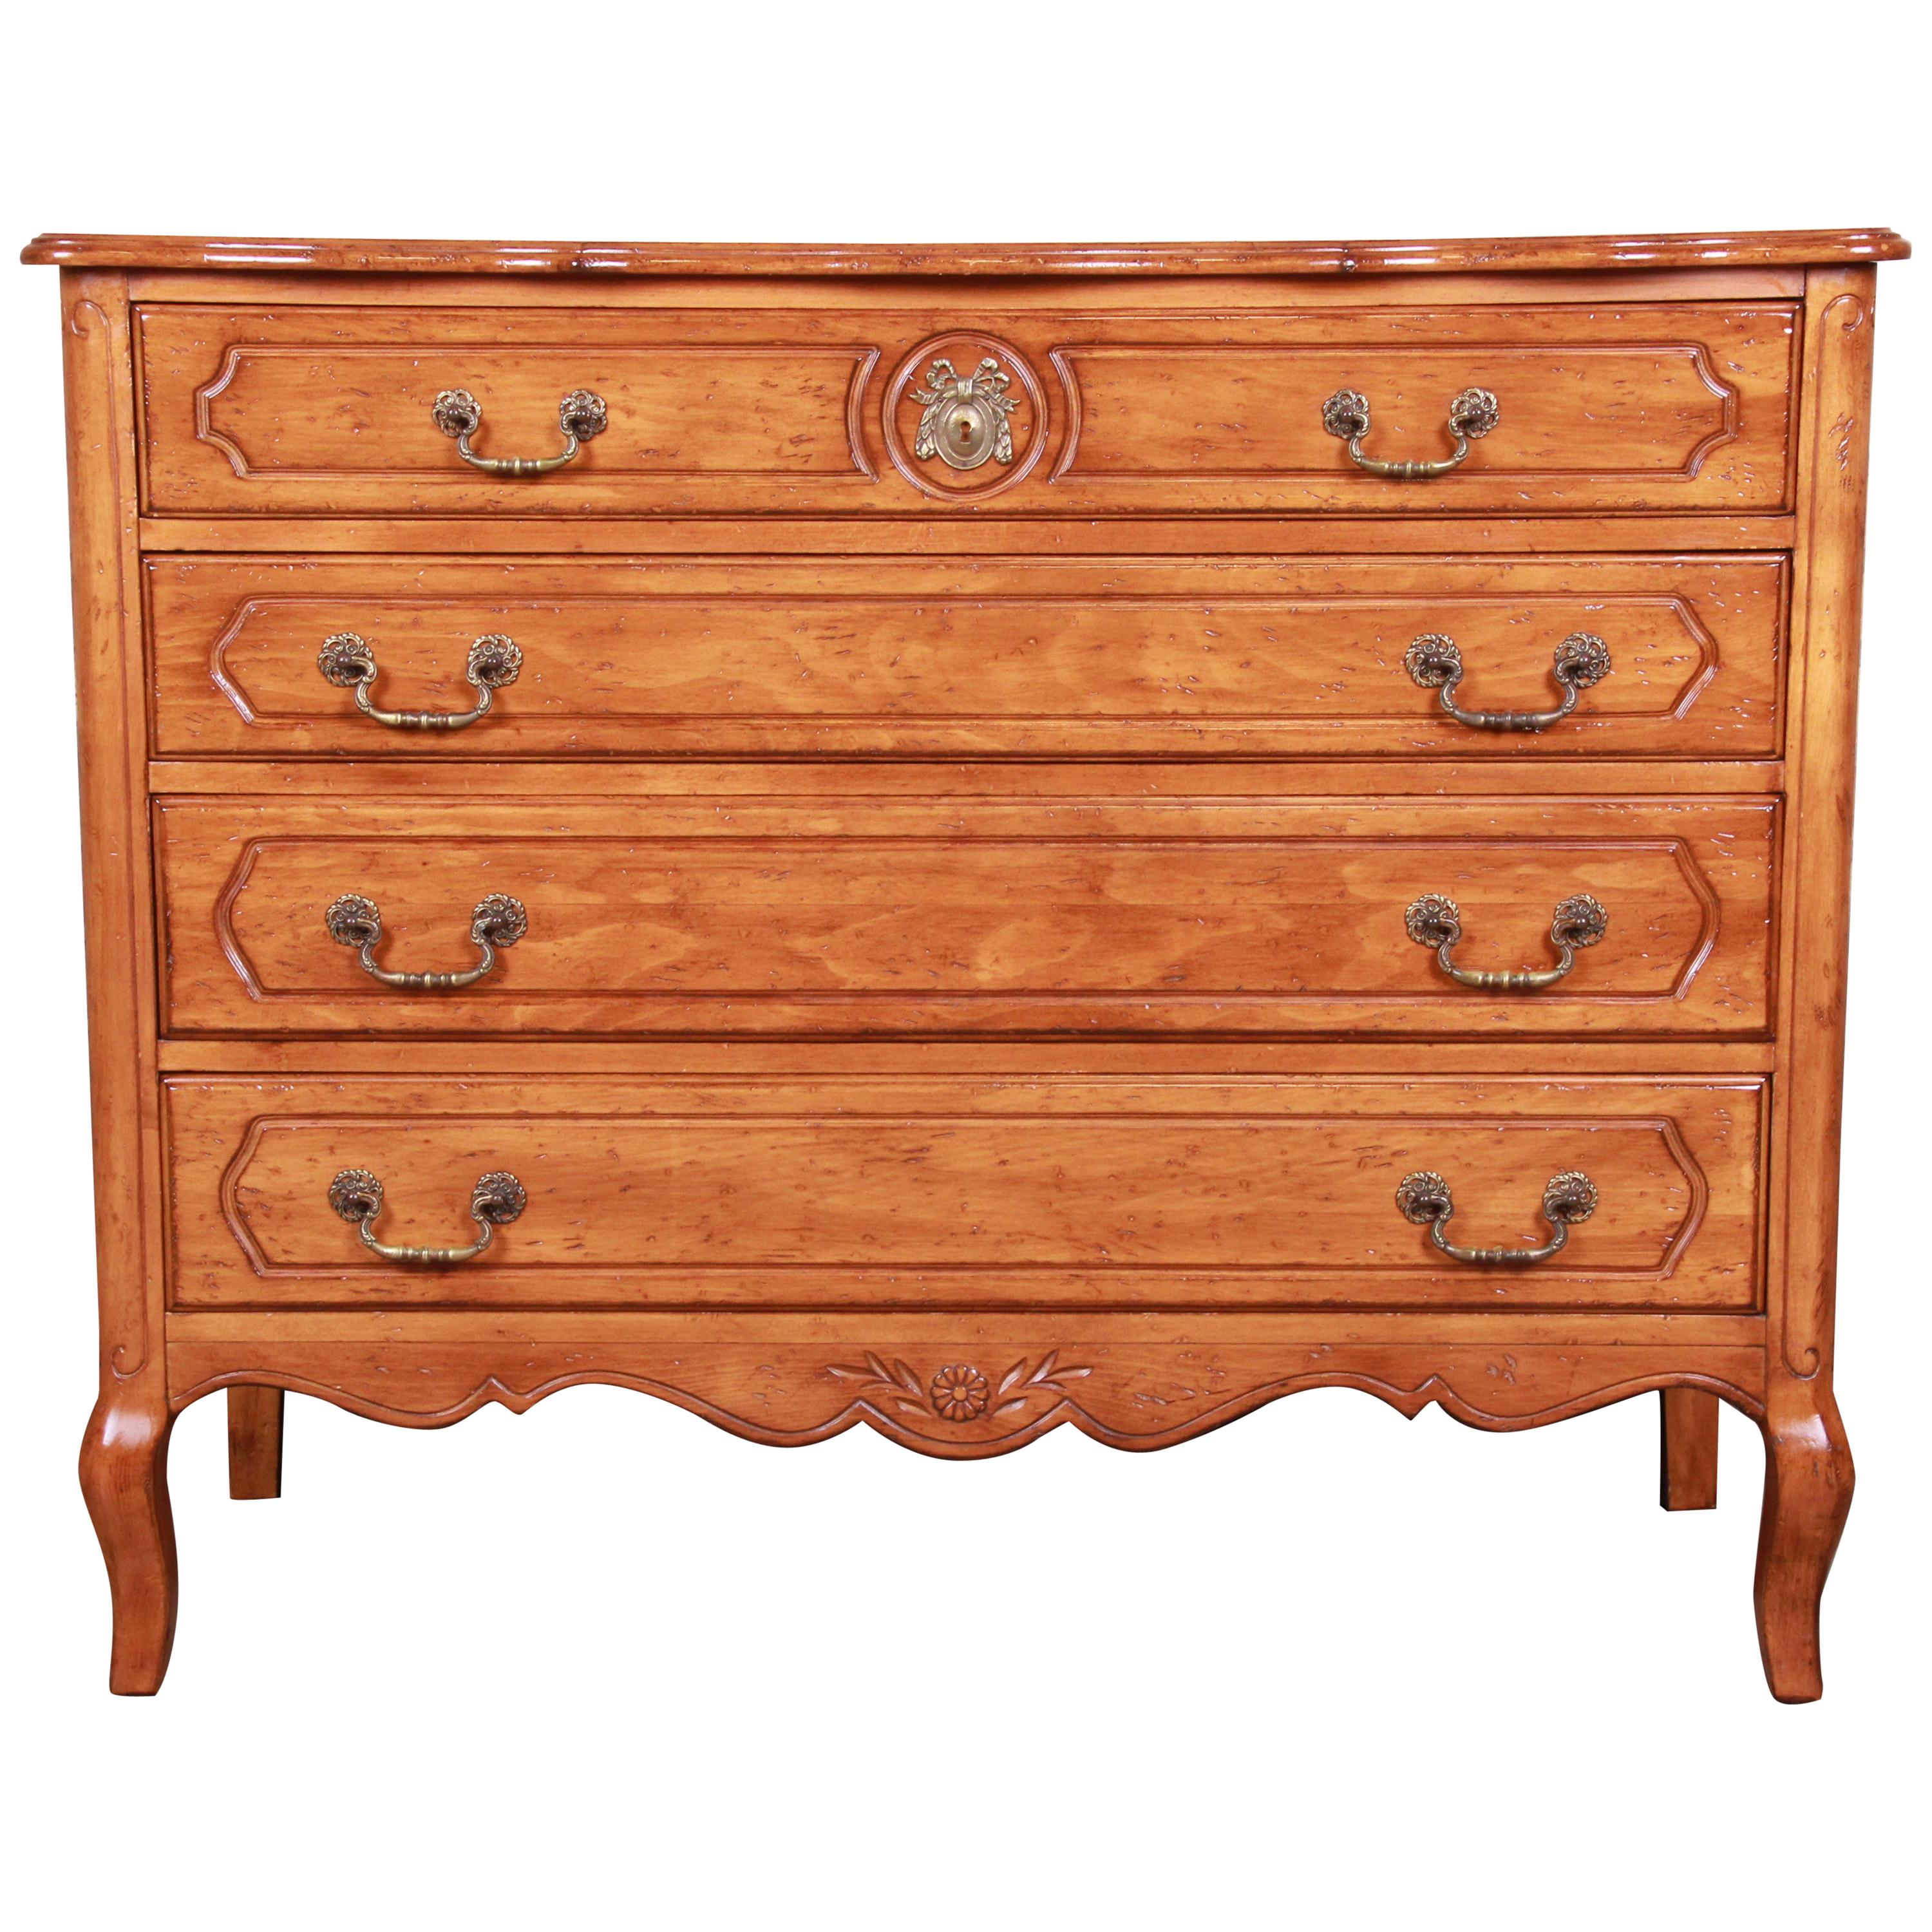 French Provincial Louis XV Carved Fruitwood Four-Drawer Dresser Chest